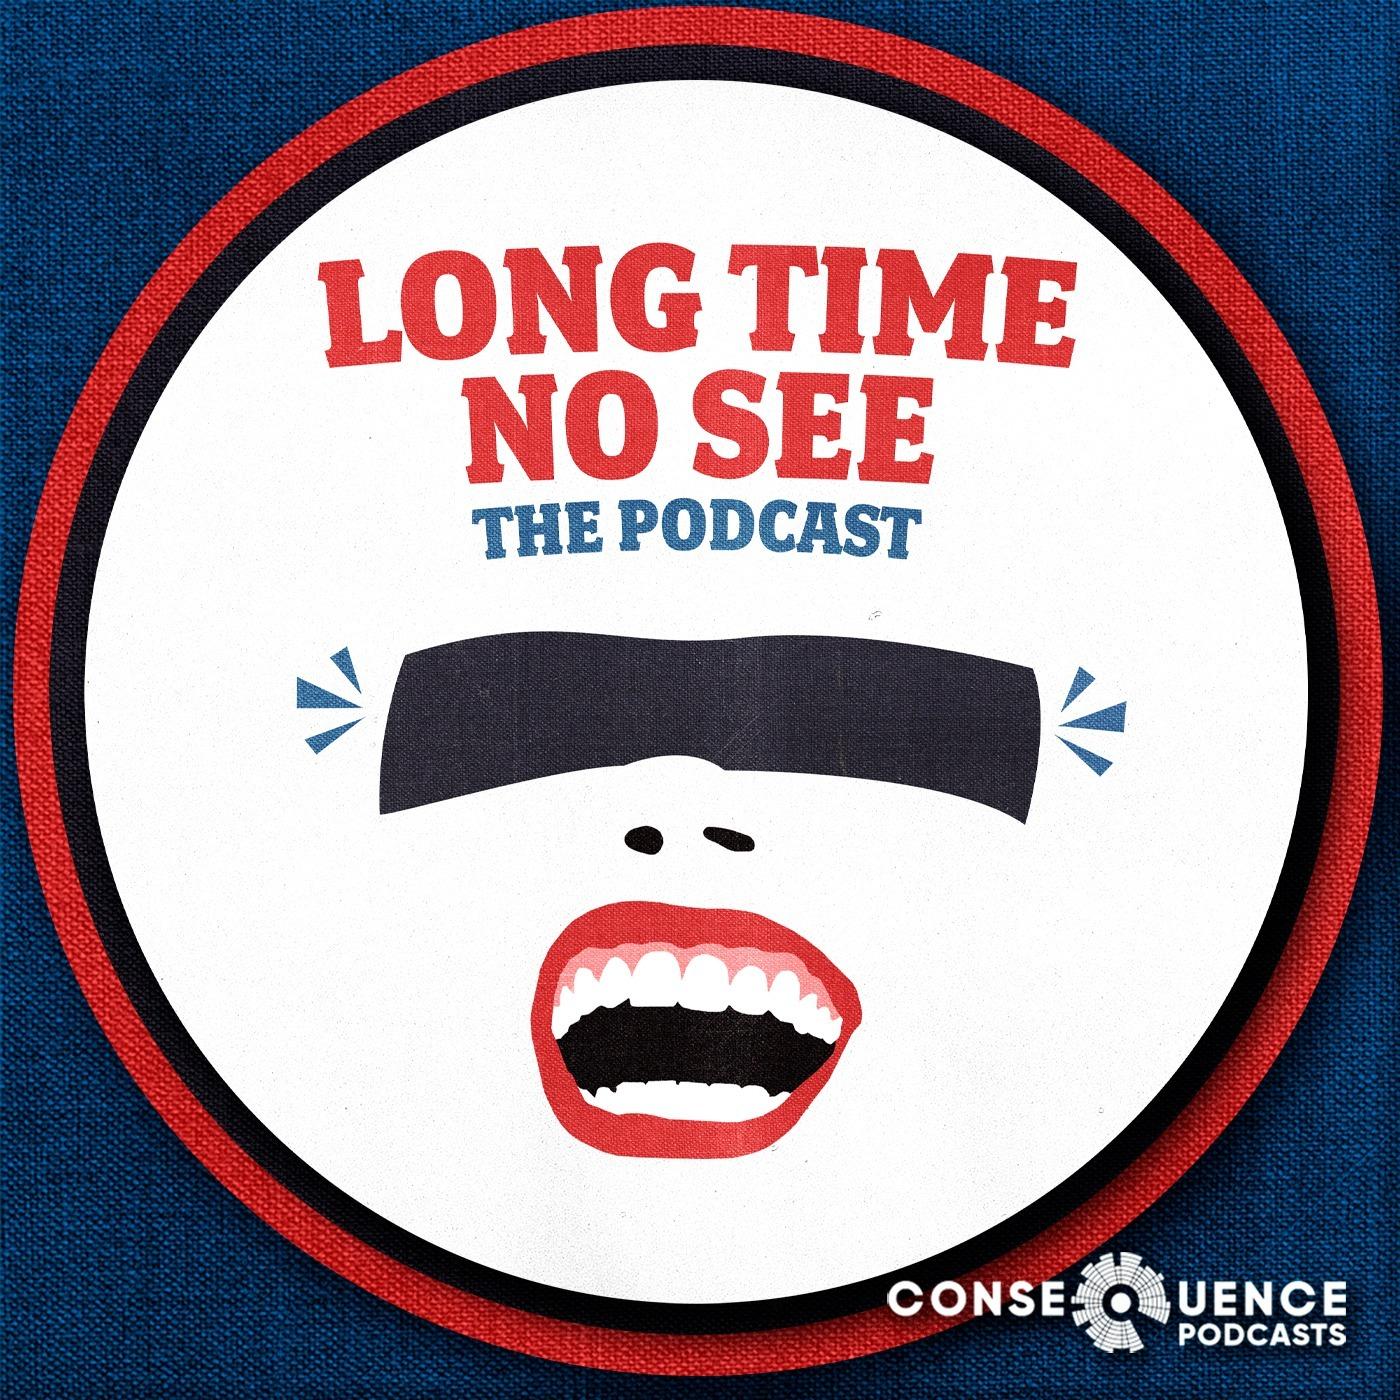 Long Time No See: The Podcast